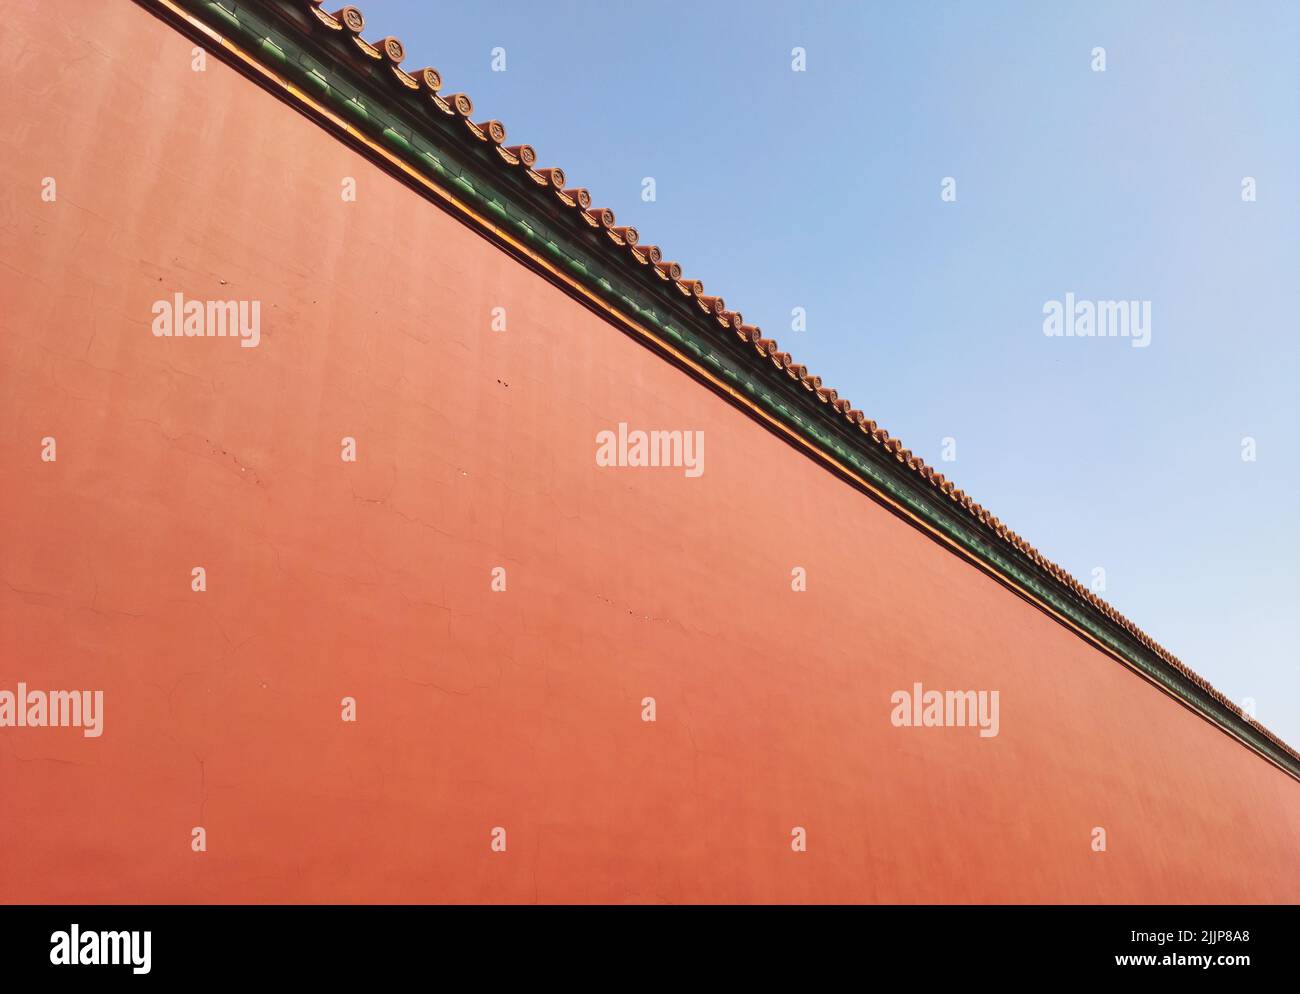 The beautiful exterior of the red-painted walls of the Palace Museum in China Stock Photo